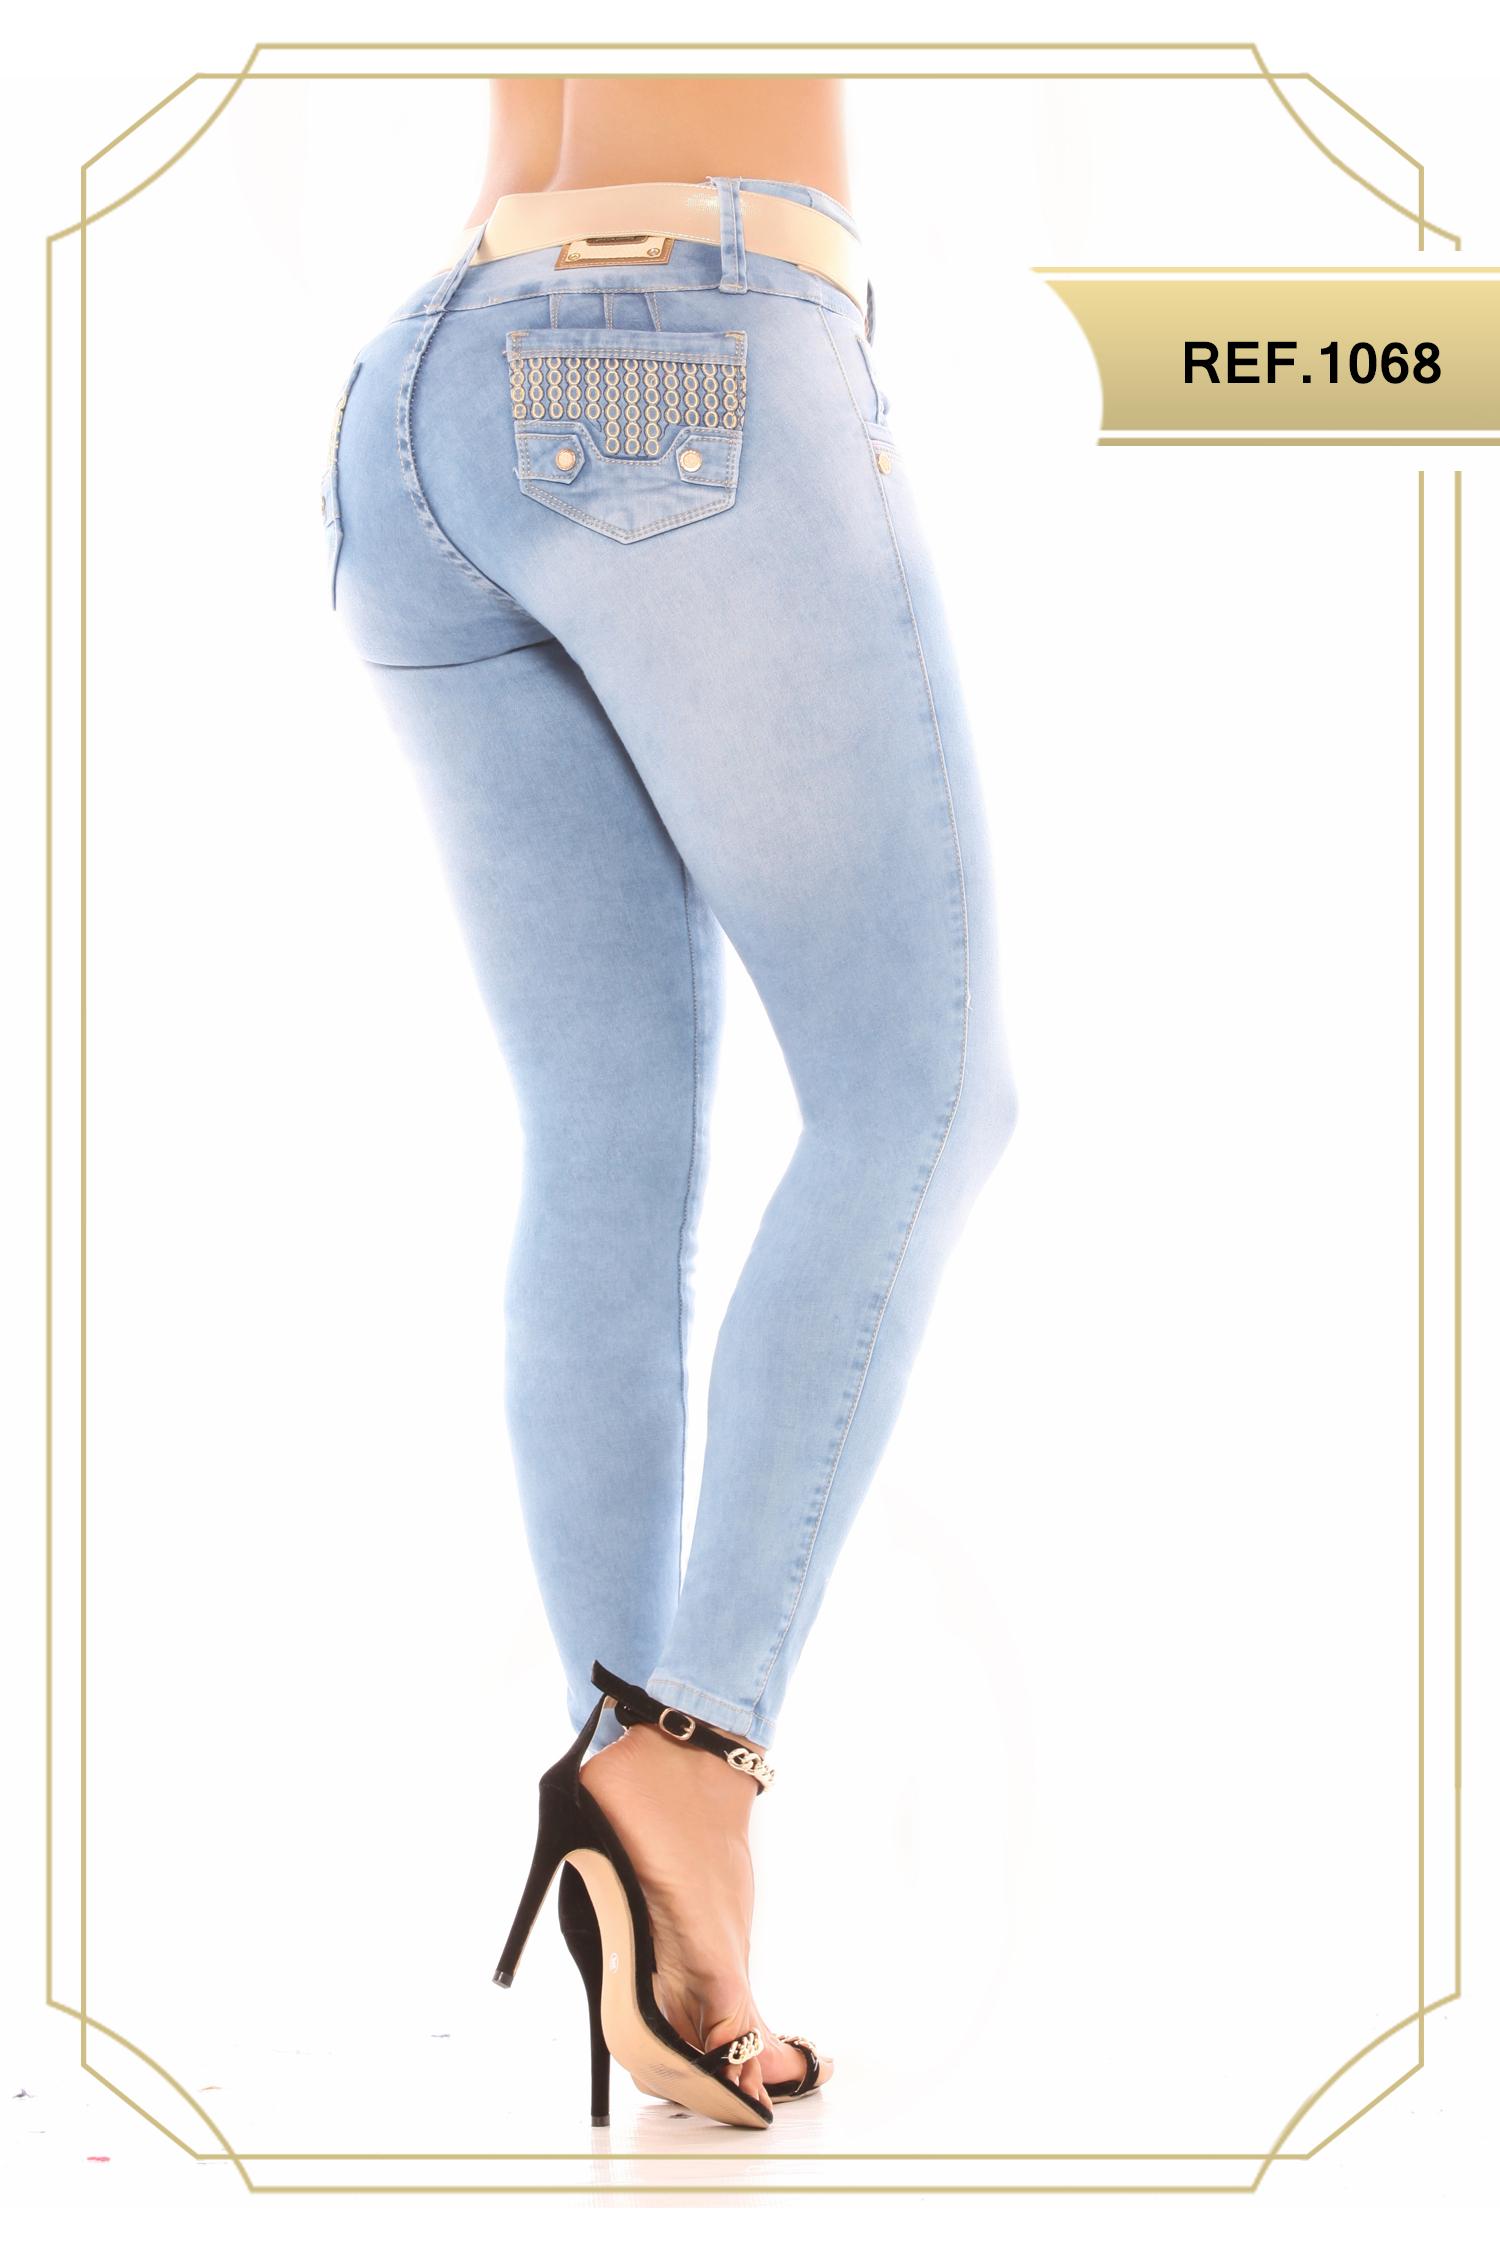 Jean Colombian Fashion with Butt Enhancement